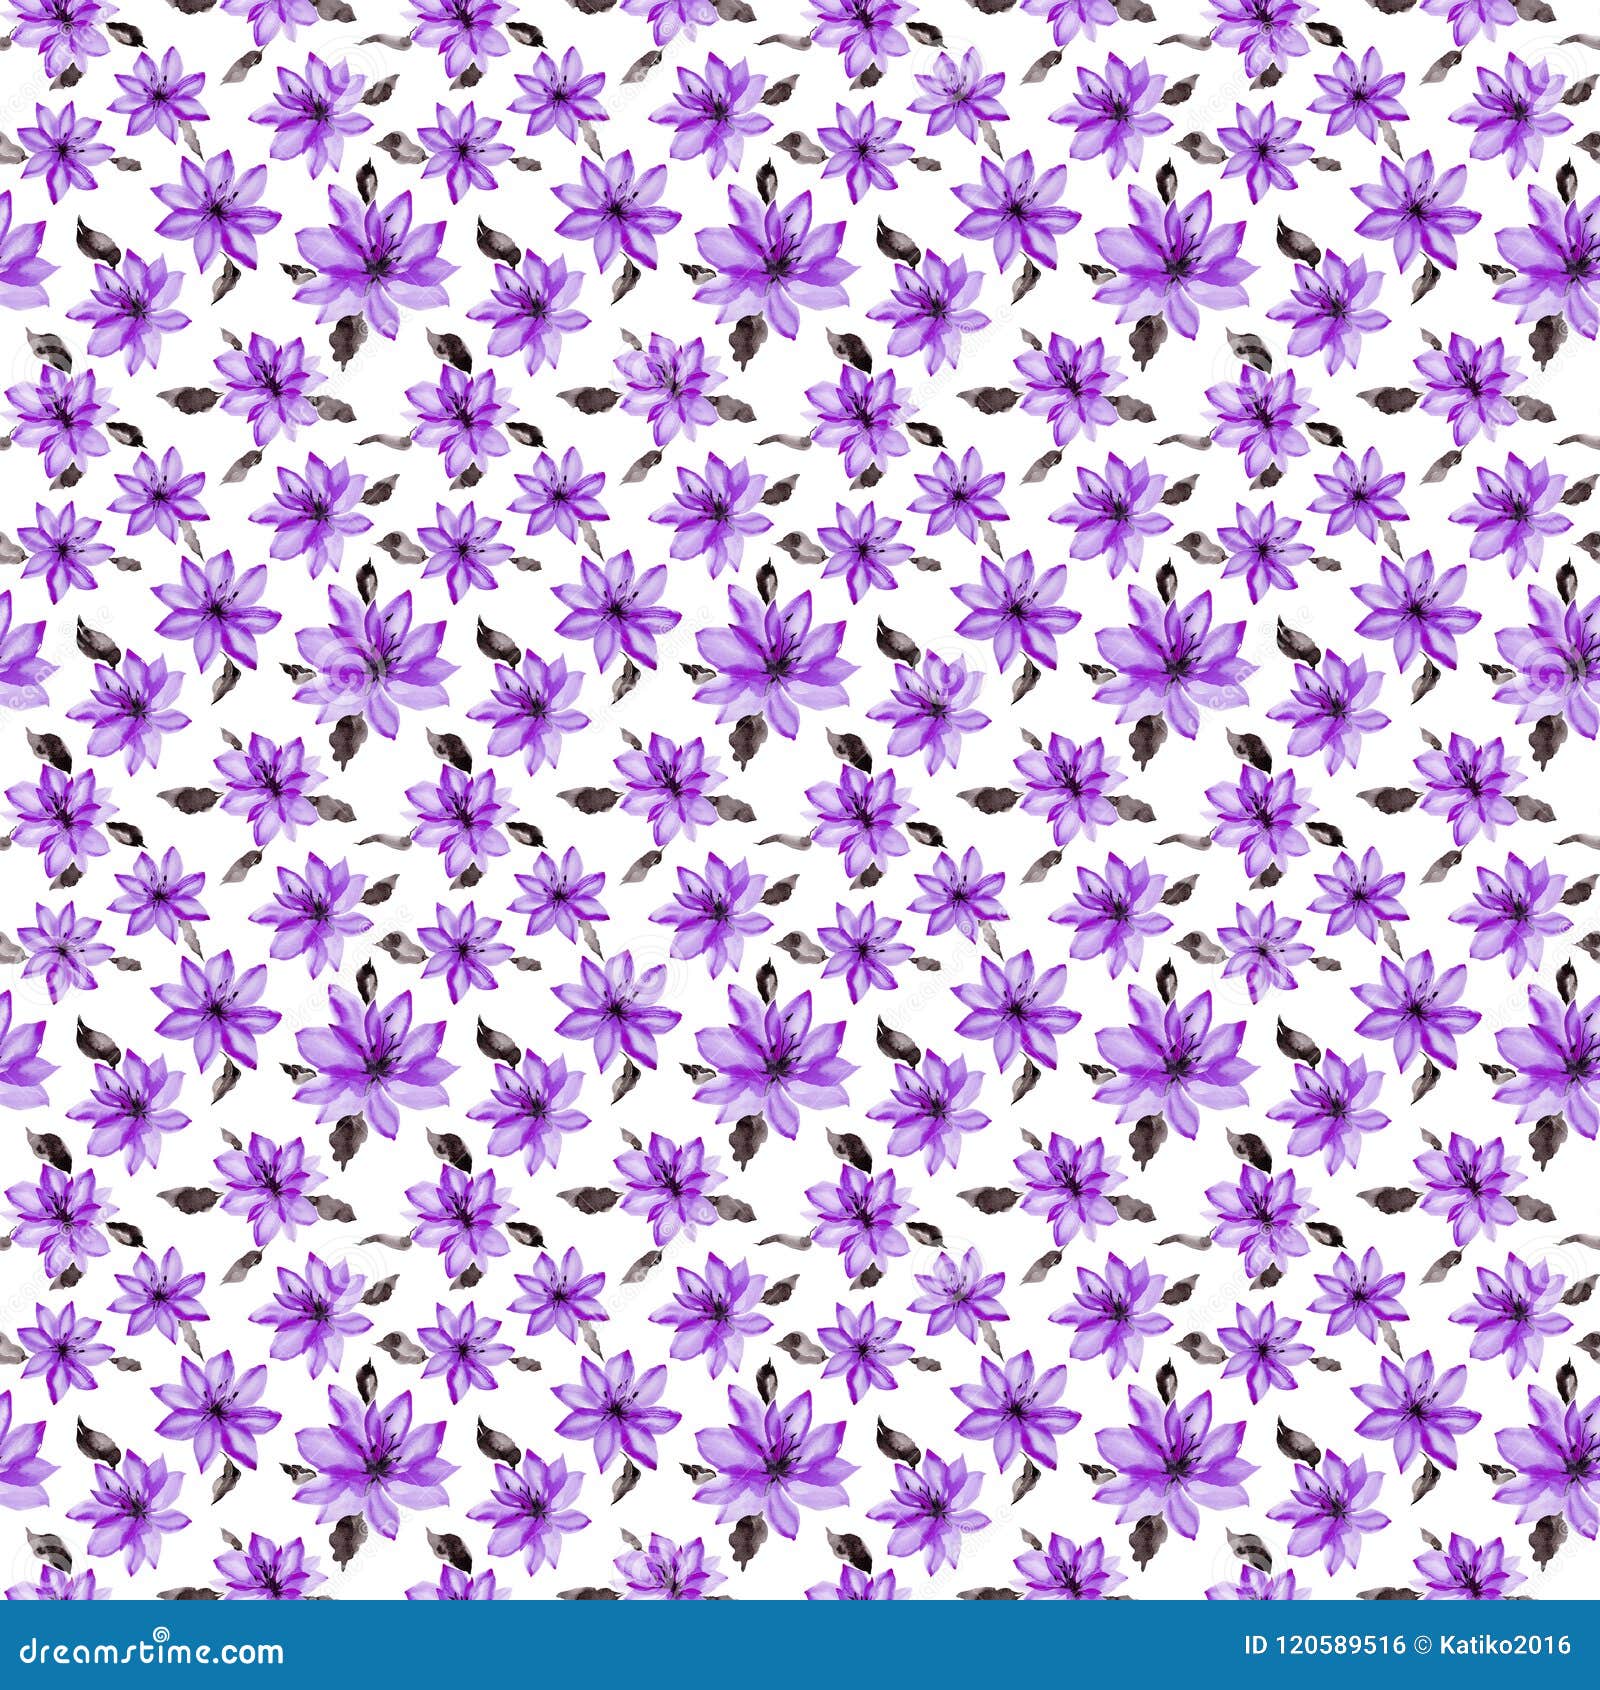 Latest Pic Purple Flowers background Thoughts Purple flowers are usually  elegant flow  Flower background iphone Flower iphone wallpaper Floral  wallpaper iphone